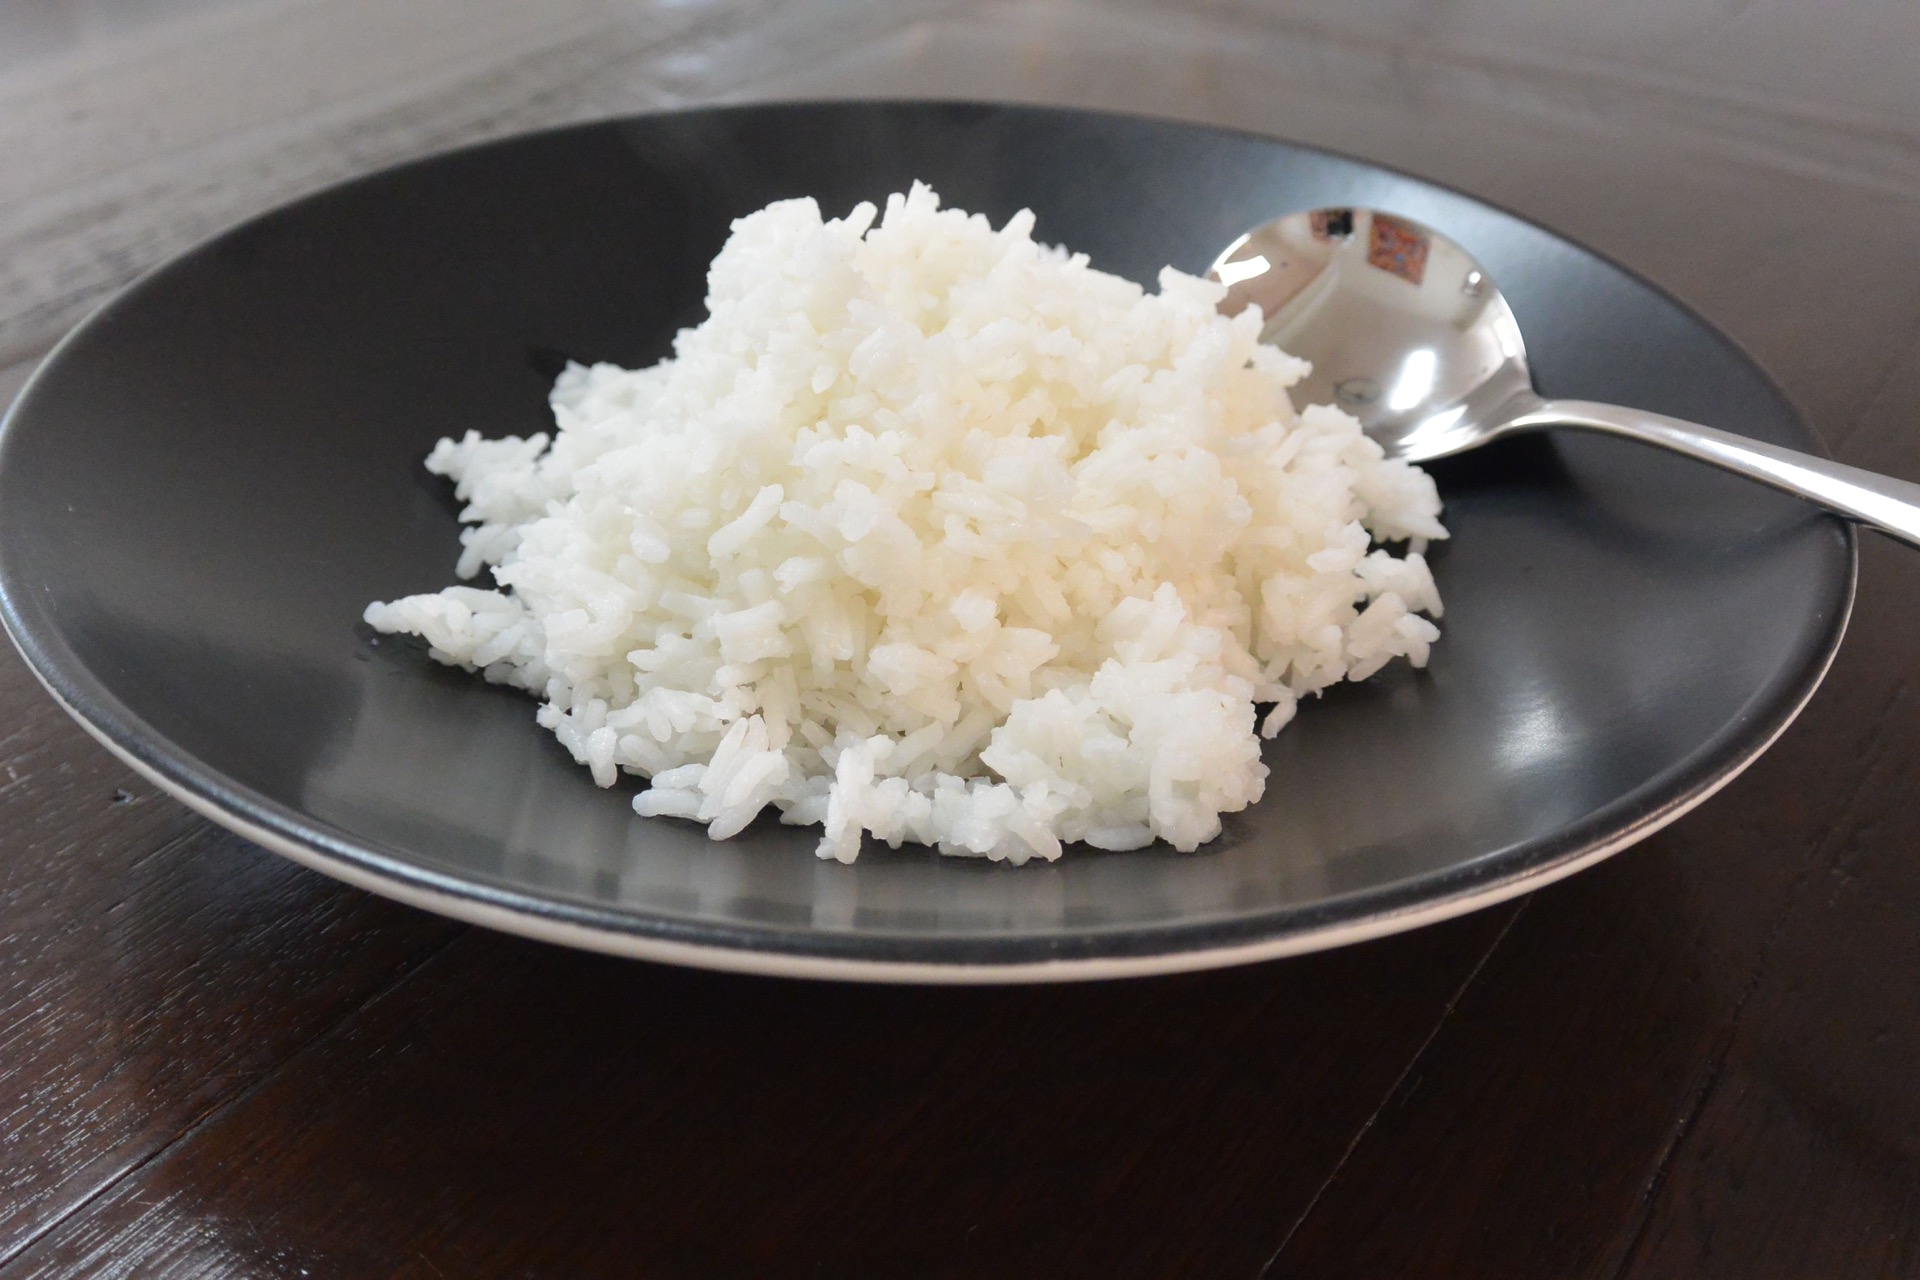 https://cookingwithsteam.com/wp-content/uploads/CWS-0033-2-Steamed-Rice-1.jpg